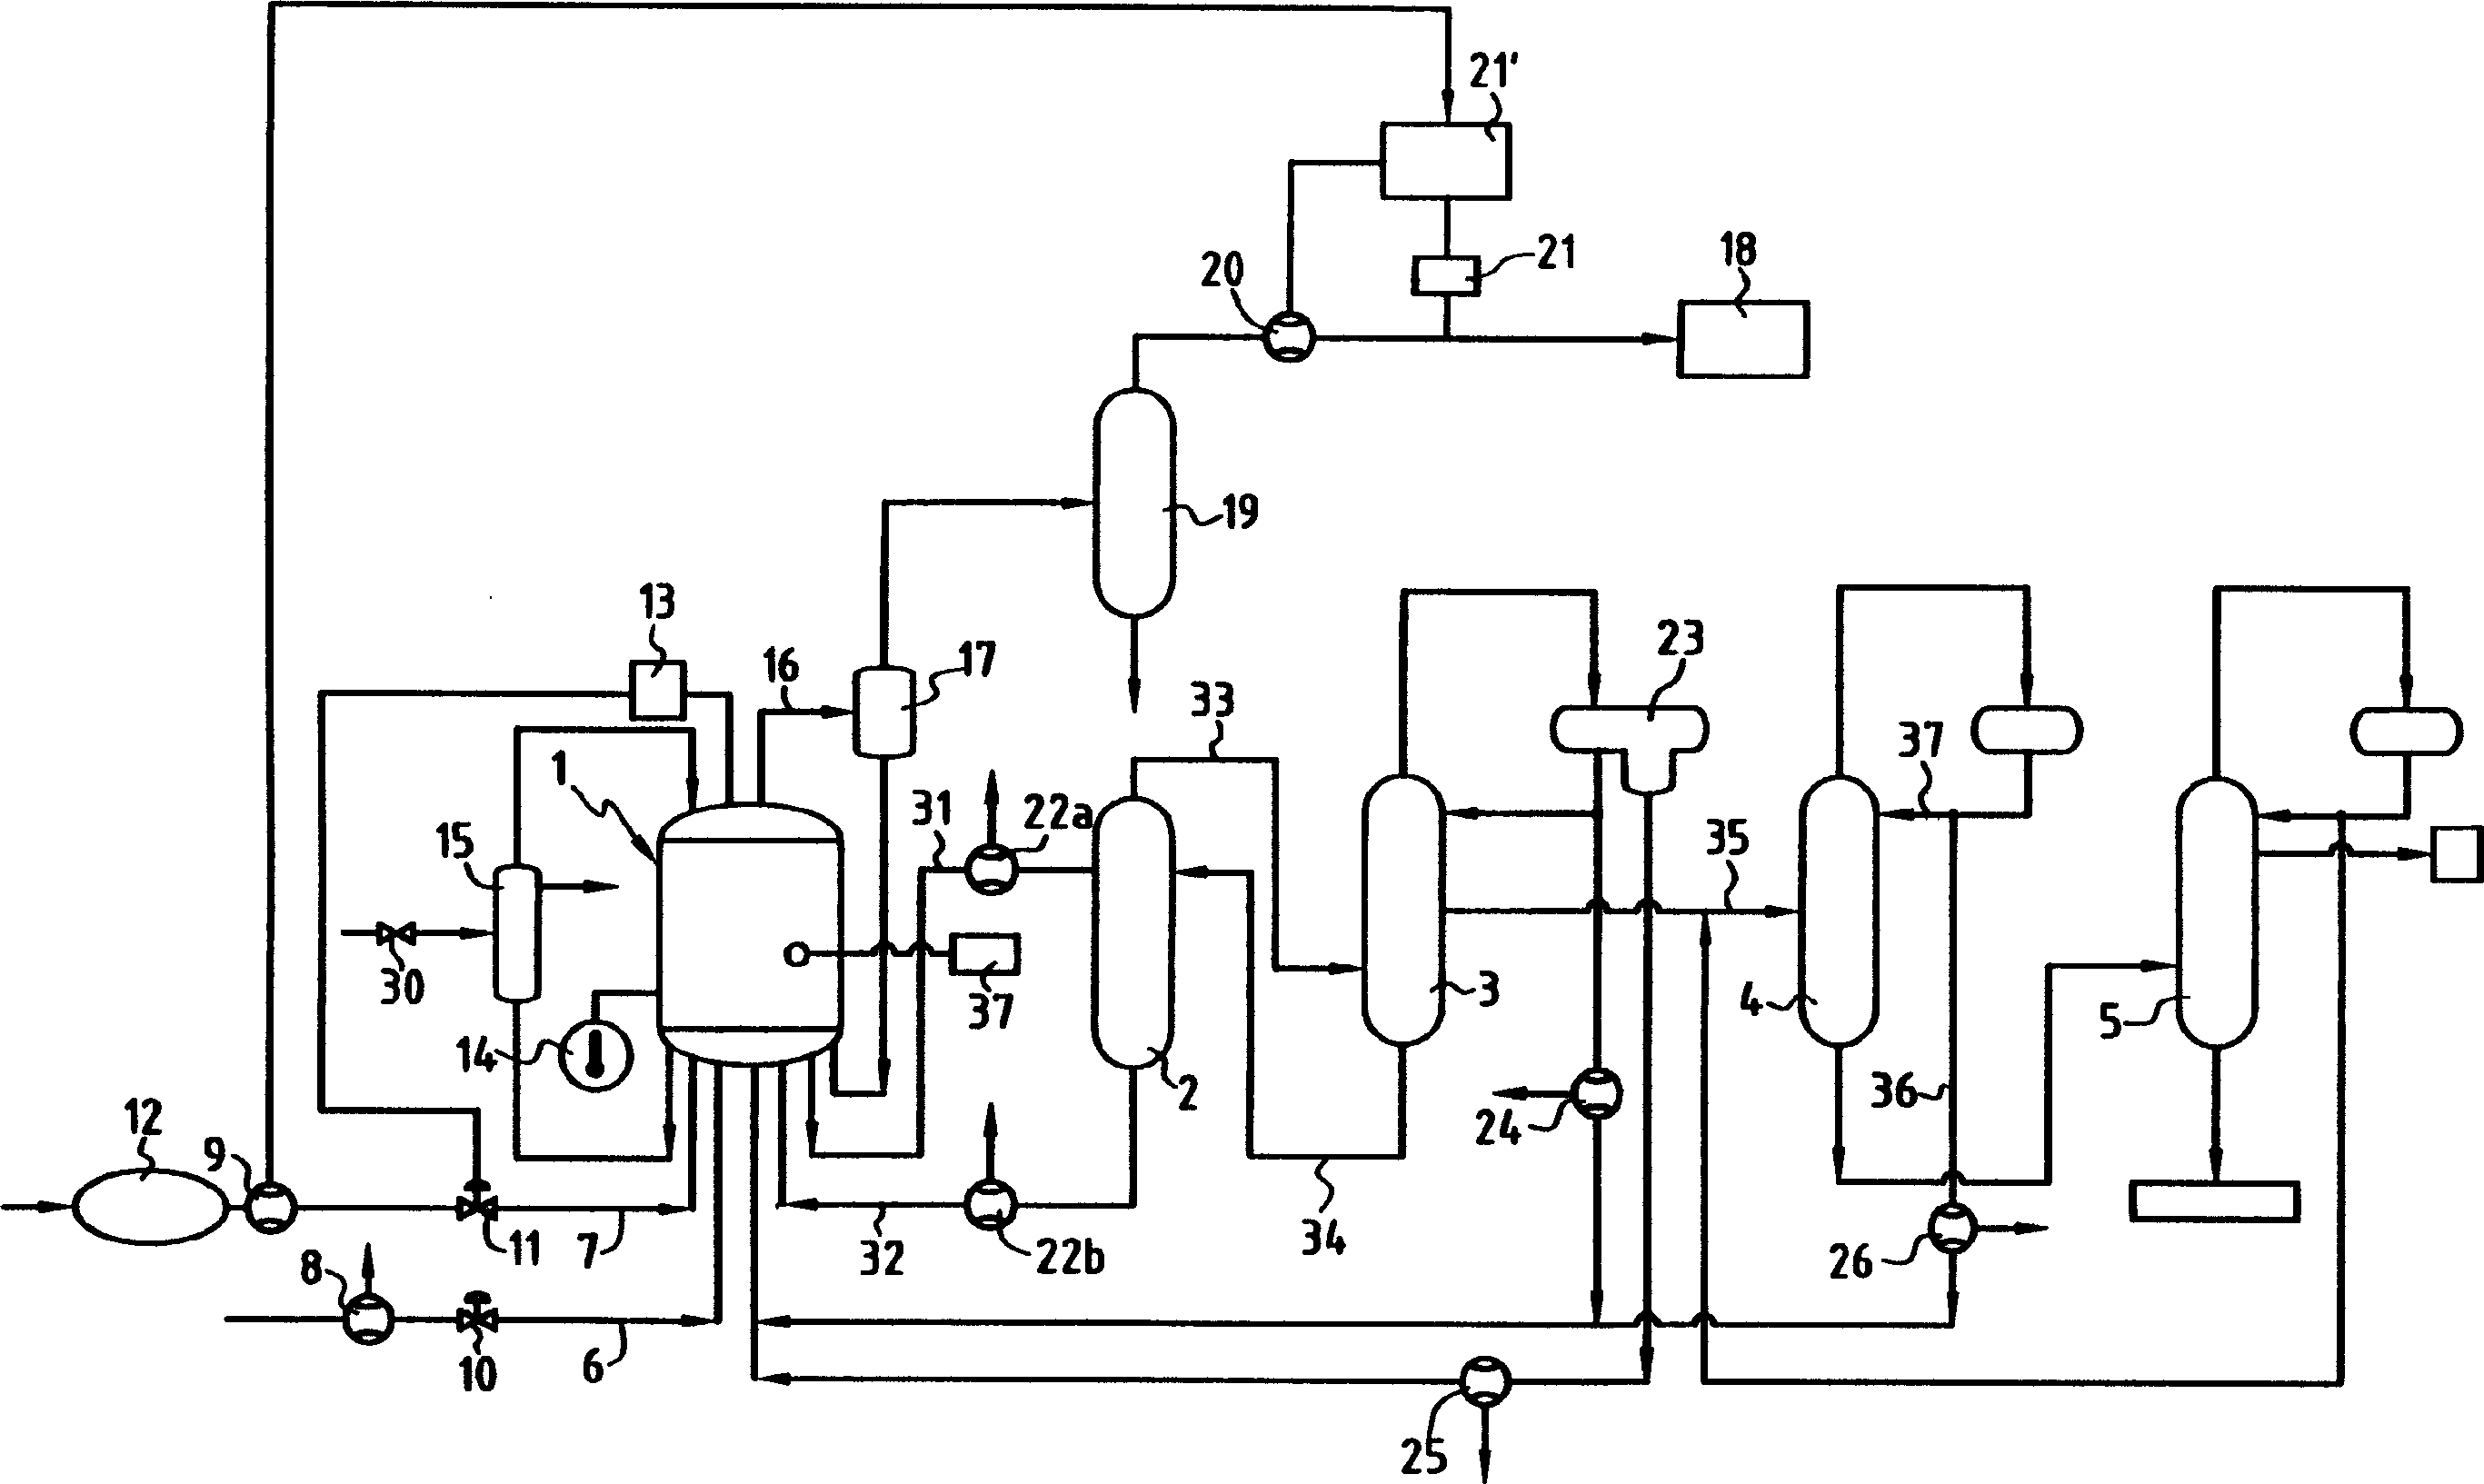 Improvement to methods for continuous production of acetic acid and/or methyl acetate